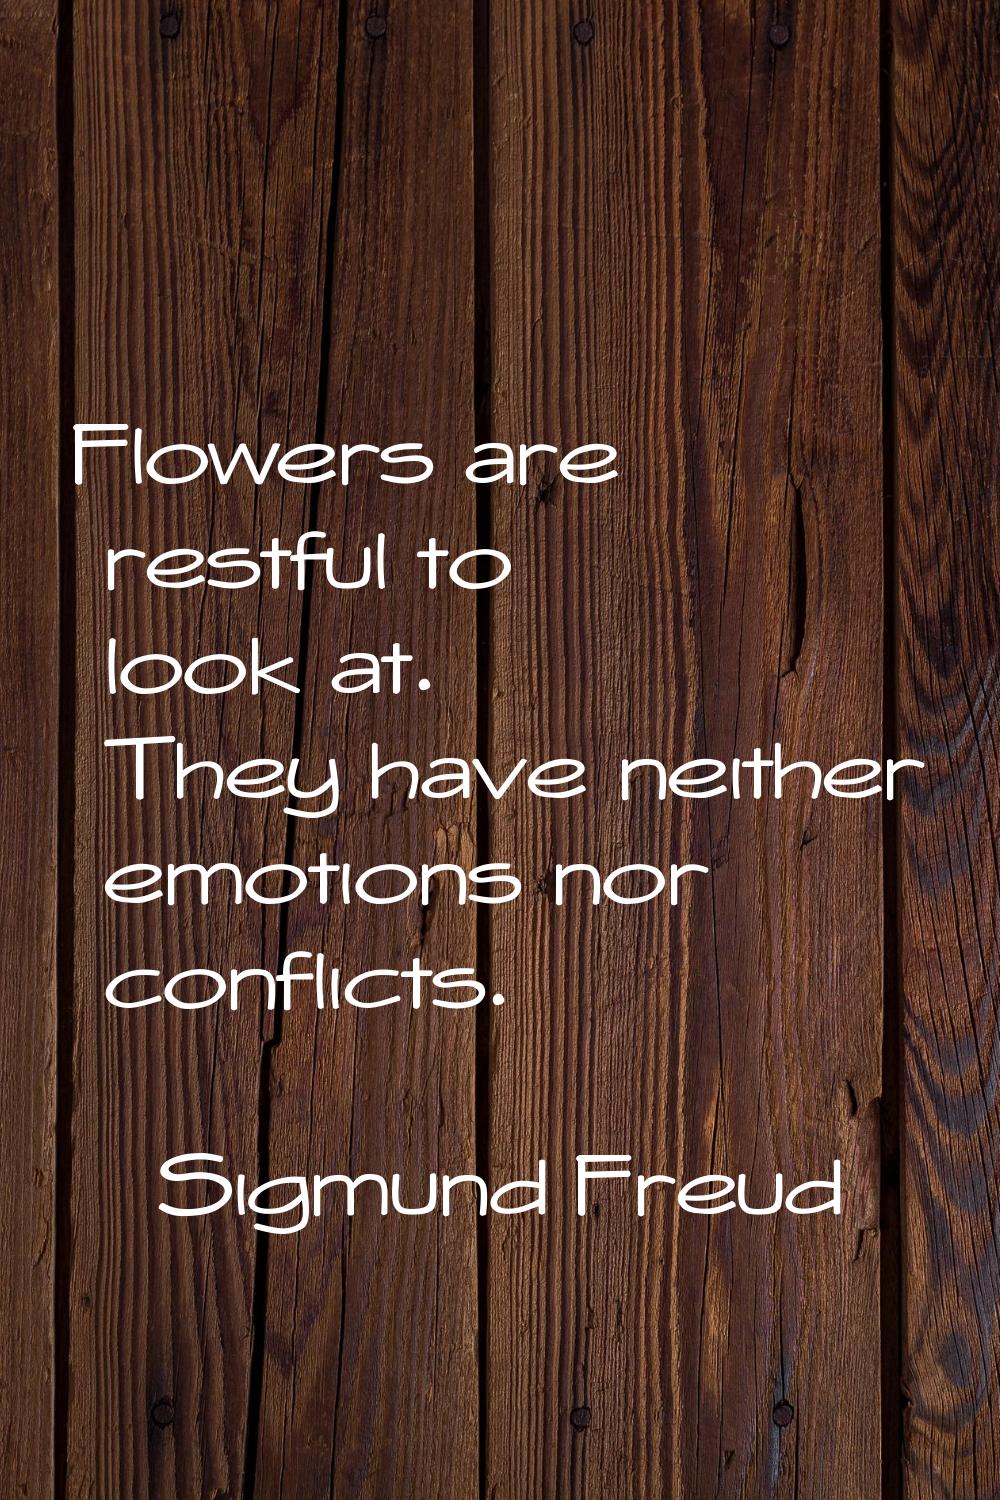 Flowers are restful to look at. They have neither emotions nor conflicts.